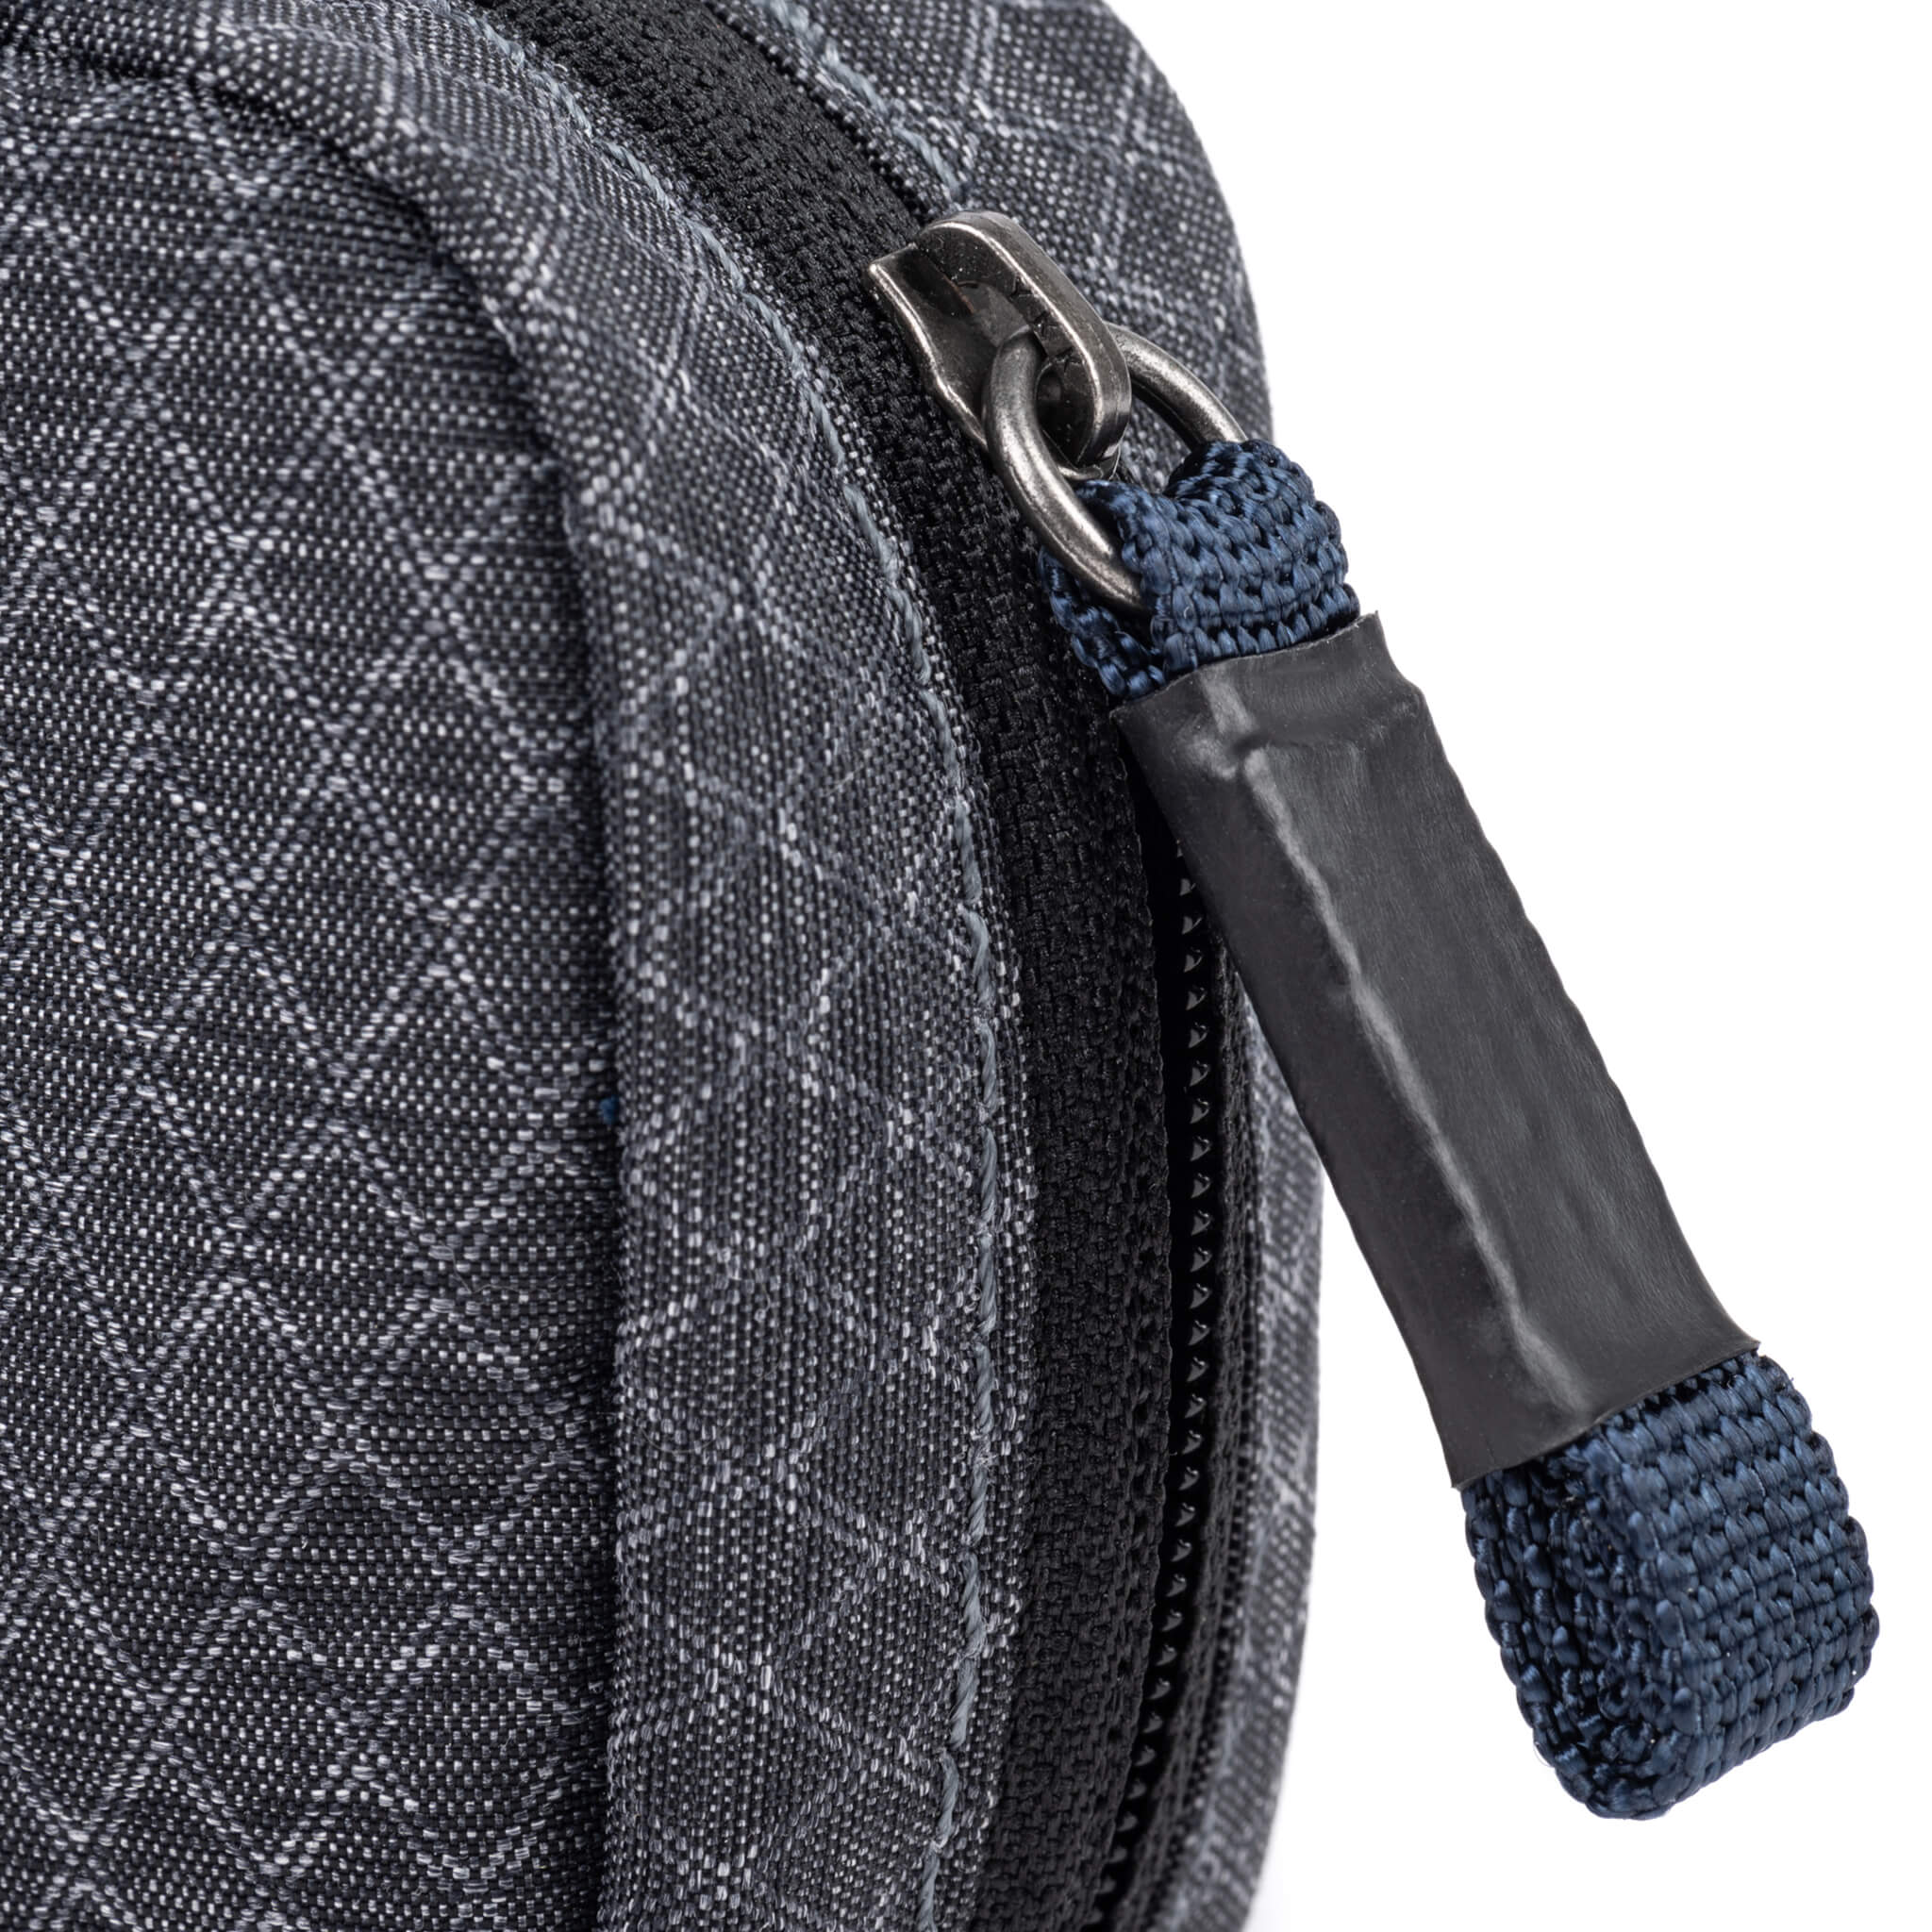 Elements Tech Pouch Sling Bag Has Lots of Space for Organizing Your EDC